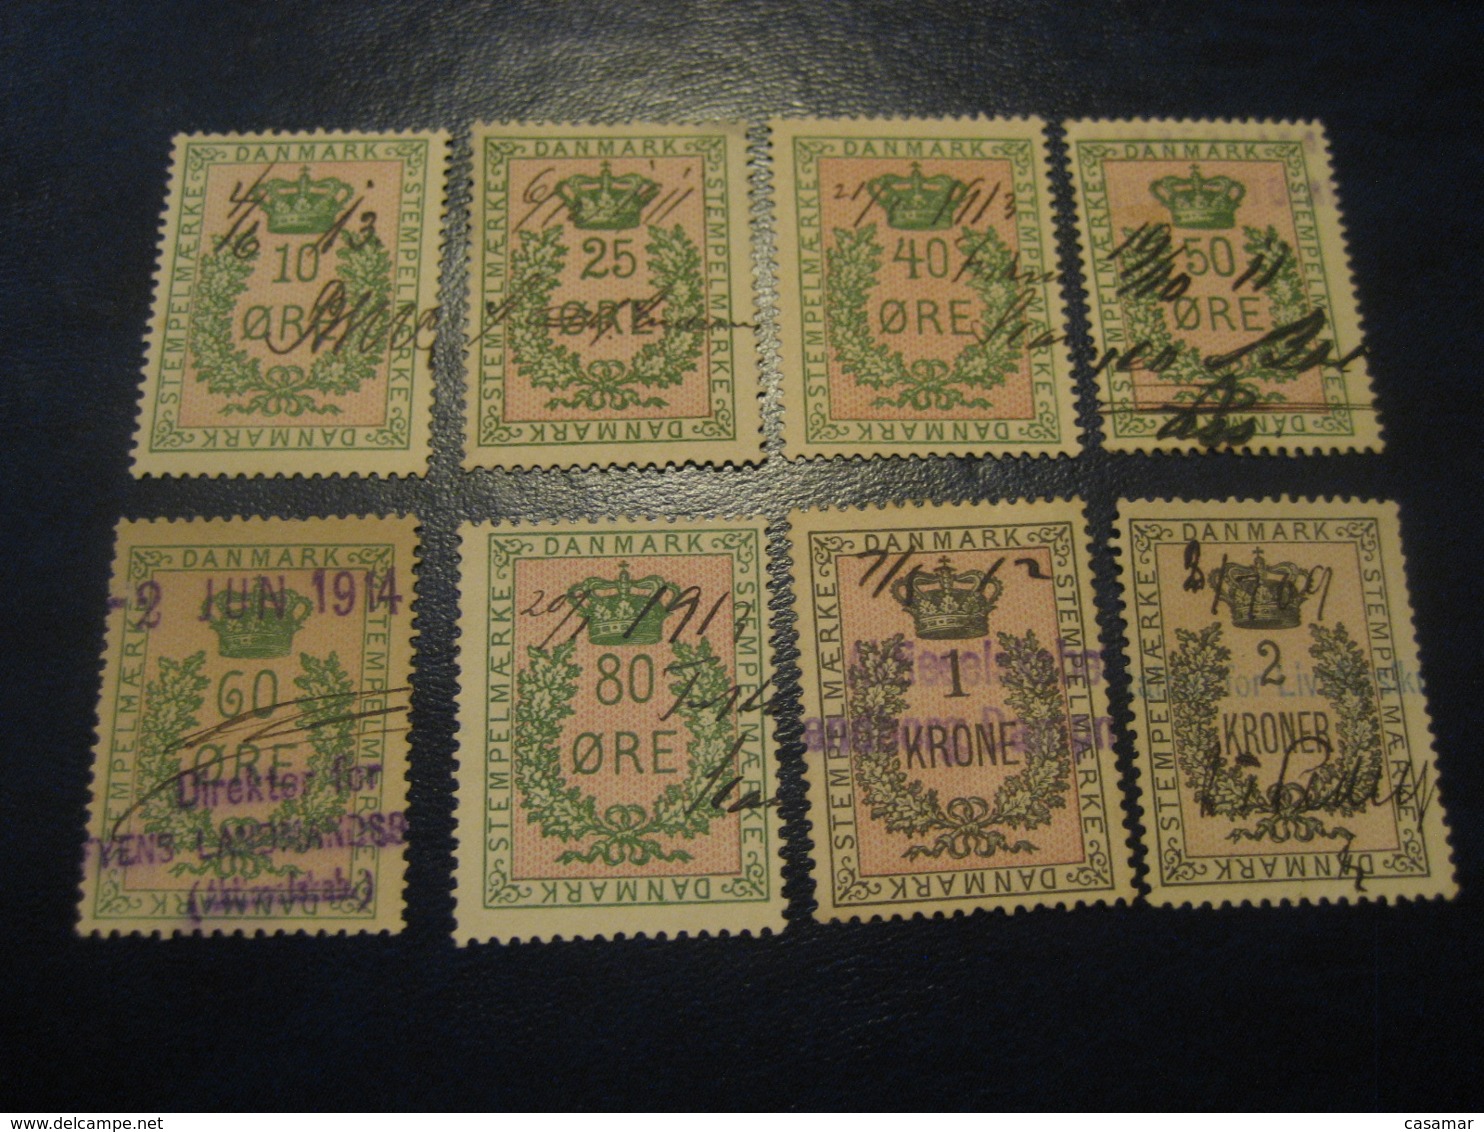 STEMPELMAERKE ( 10 Ore To 2 Kr ) 8 Fiscal Tax Revenue Postage Due Official DENMARK - Fiscali